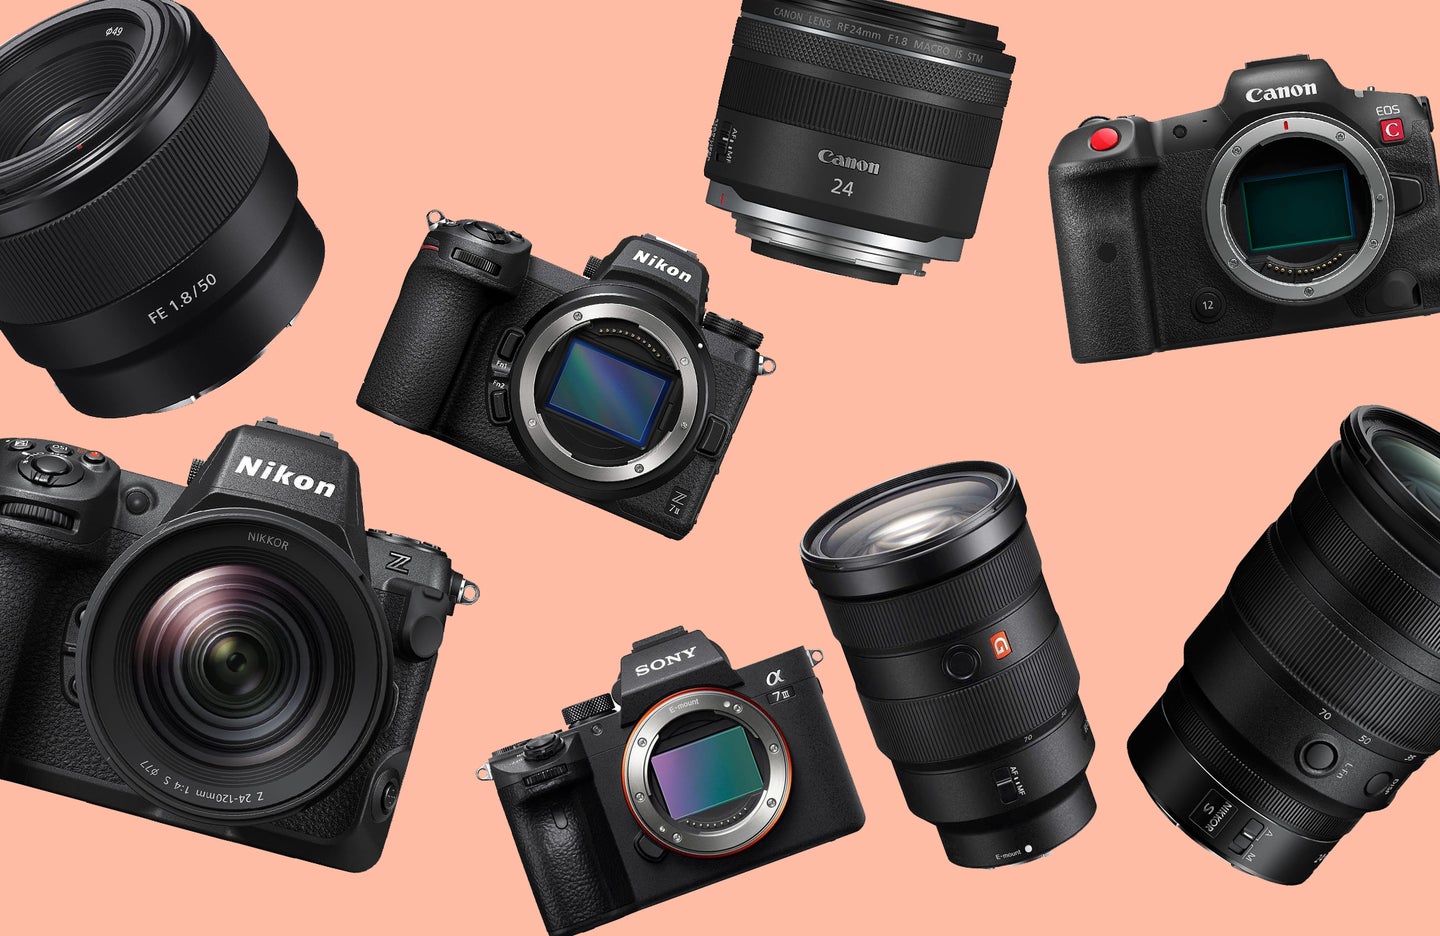 Cameras and lenses from Nikon, Canon, and Sony